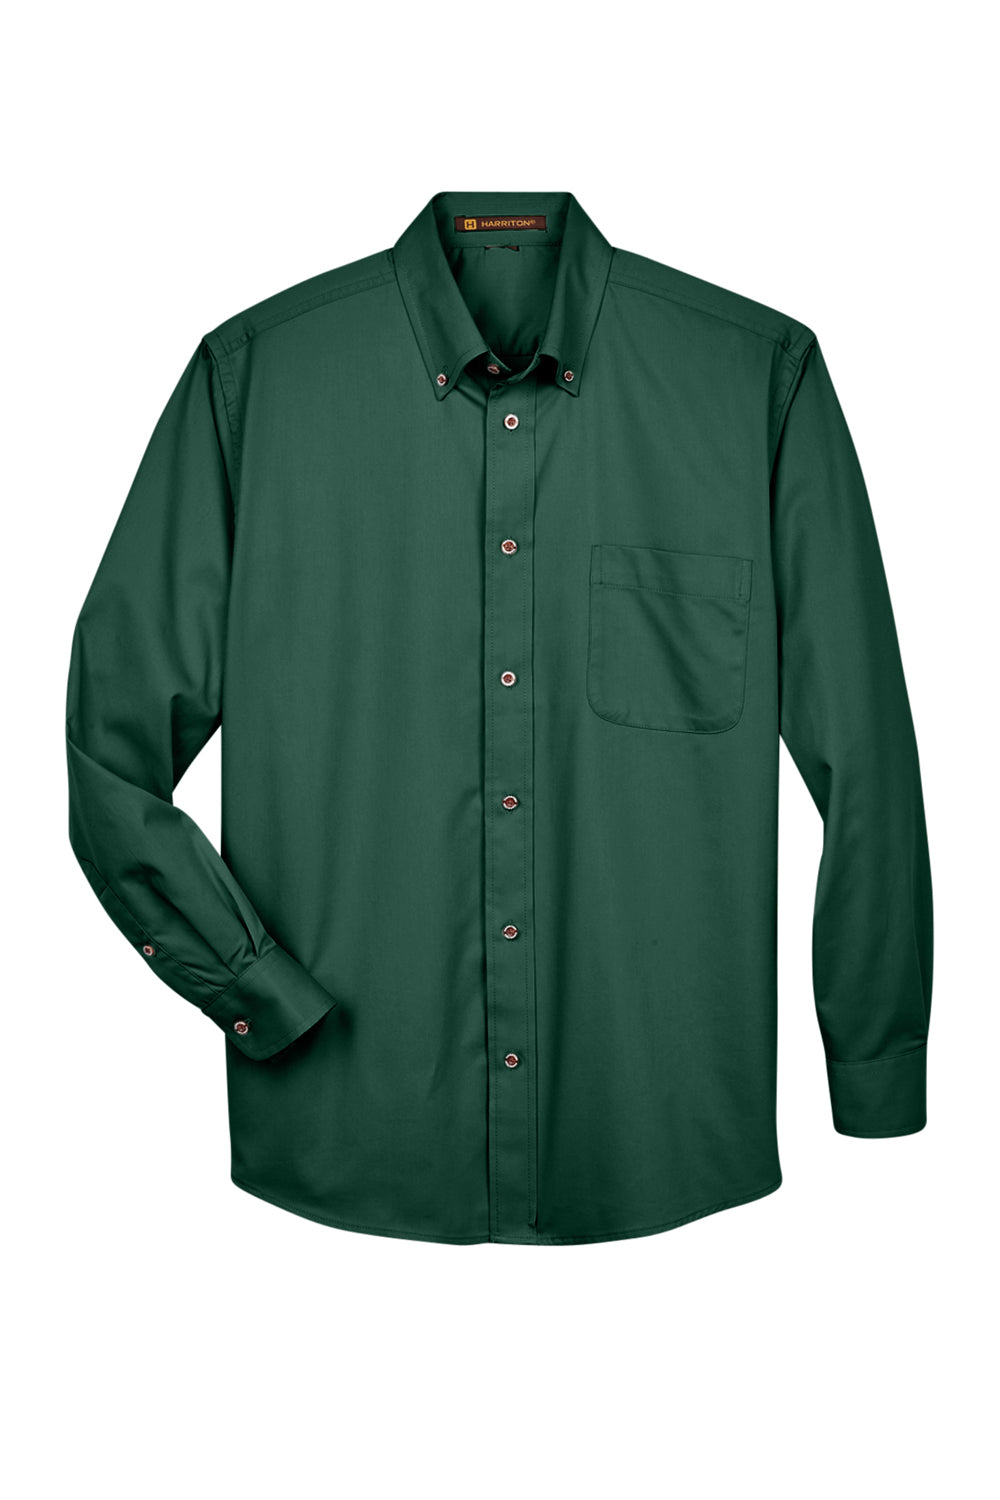 Harriton M500/M500T Wrinkle Resistant Long Sleeve Button Down Shirt w/ Pocket Hunter Green Flat Front